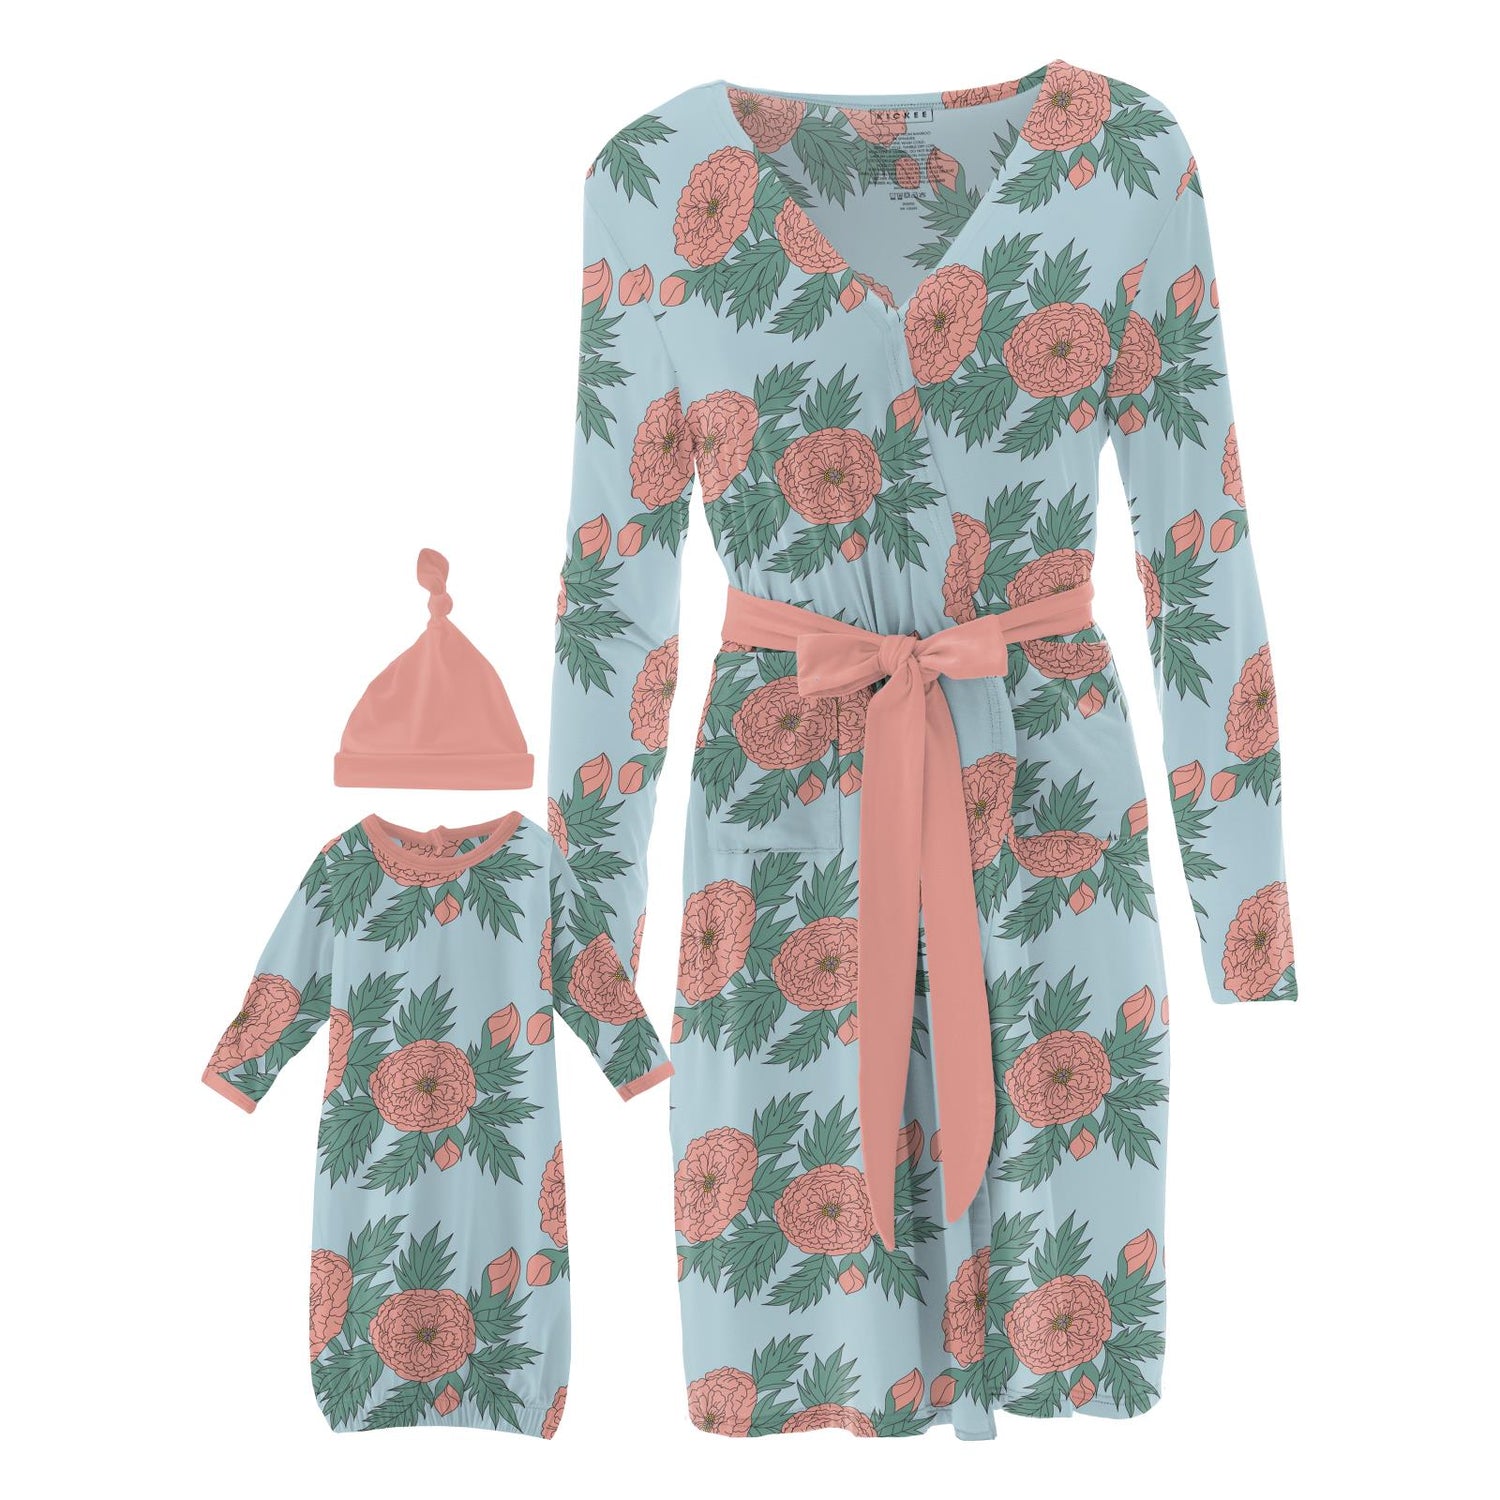 Women's Maternity/Nursing Robe & Layette Gown Set in Spring Sky Floral